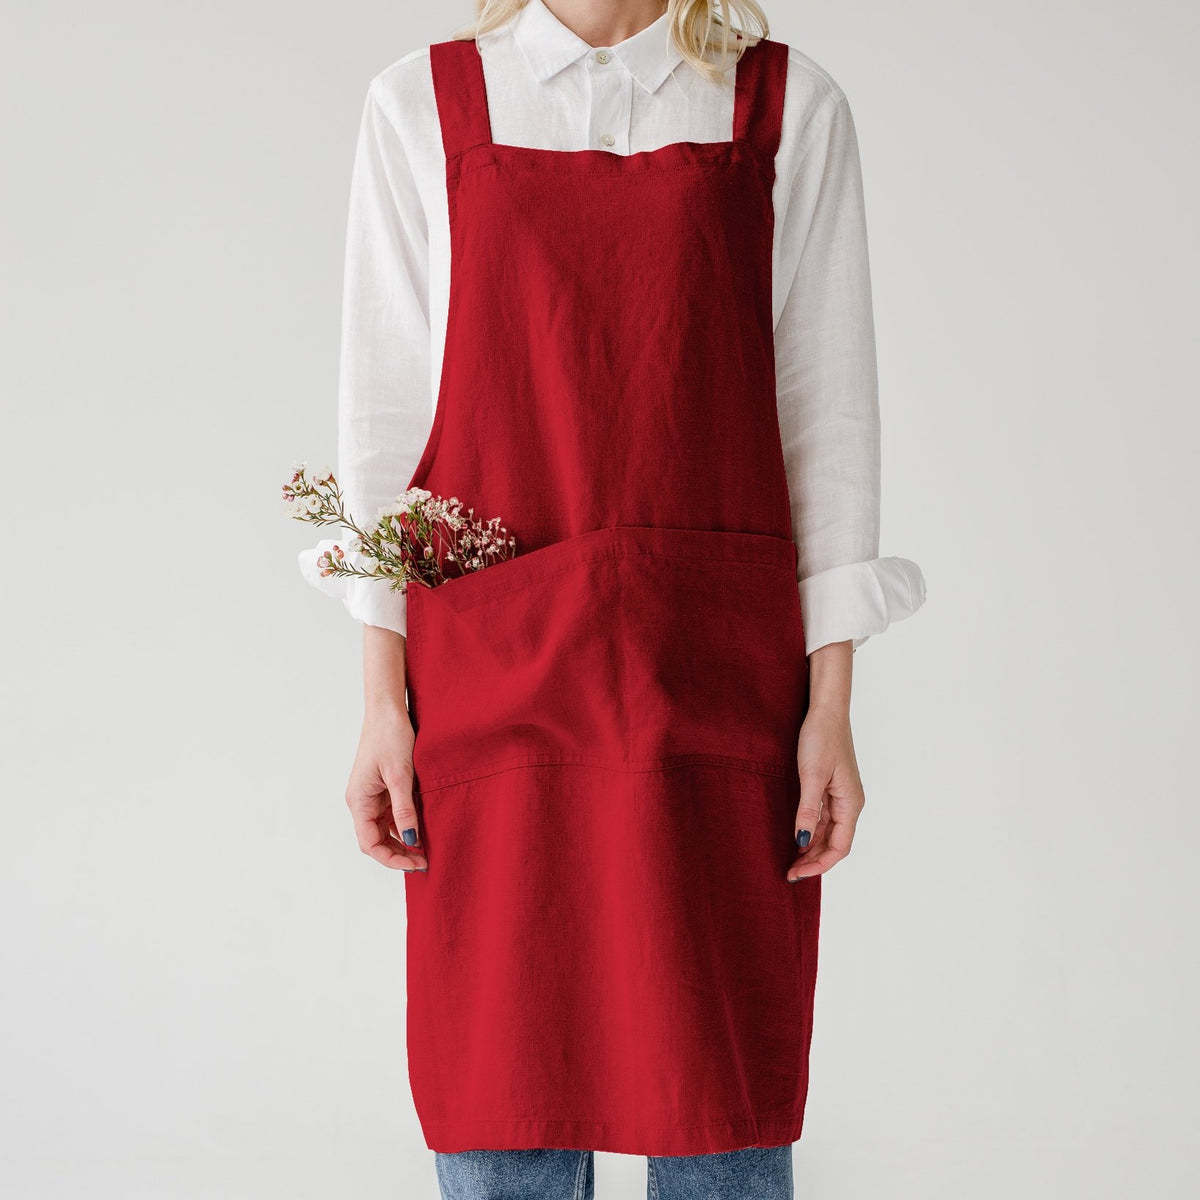 Crossback Apron - Red Pear